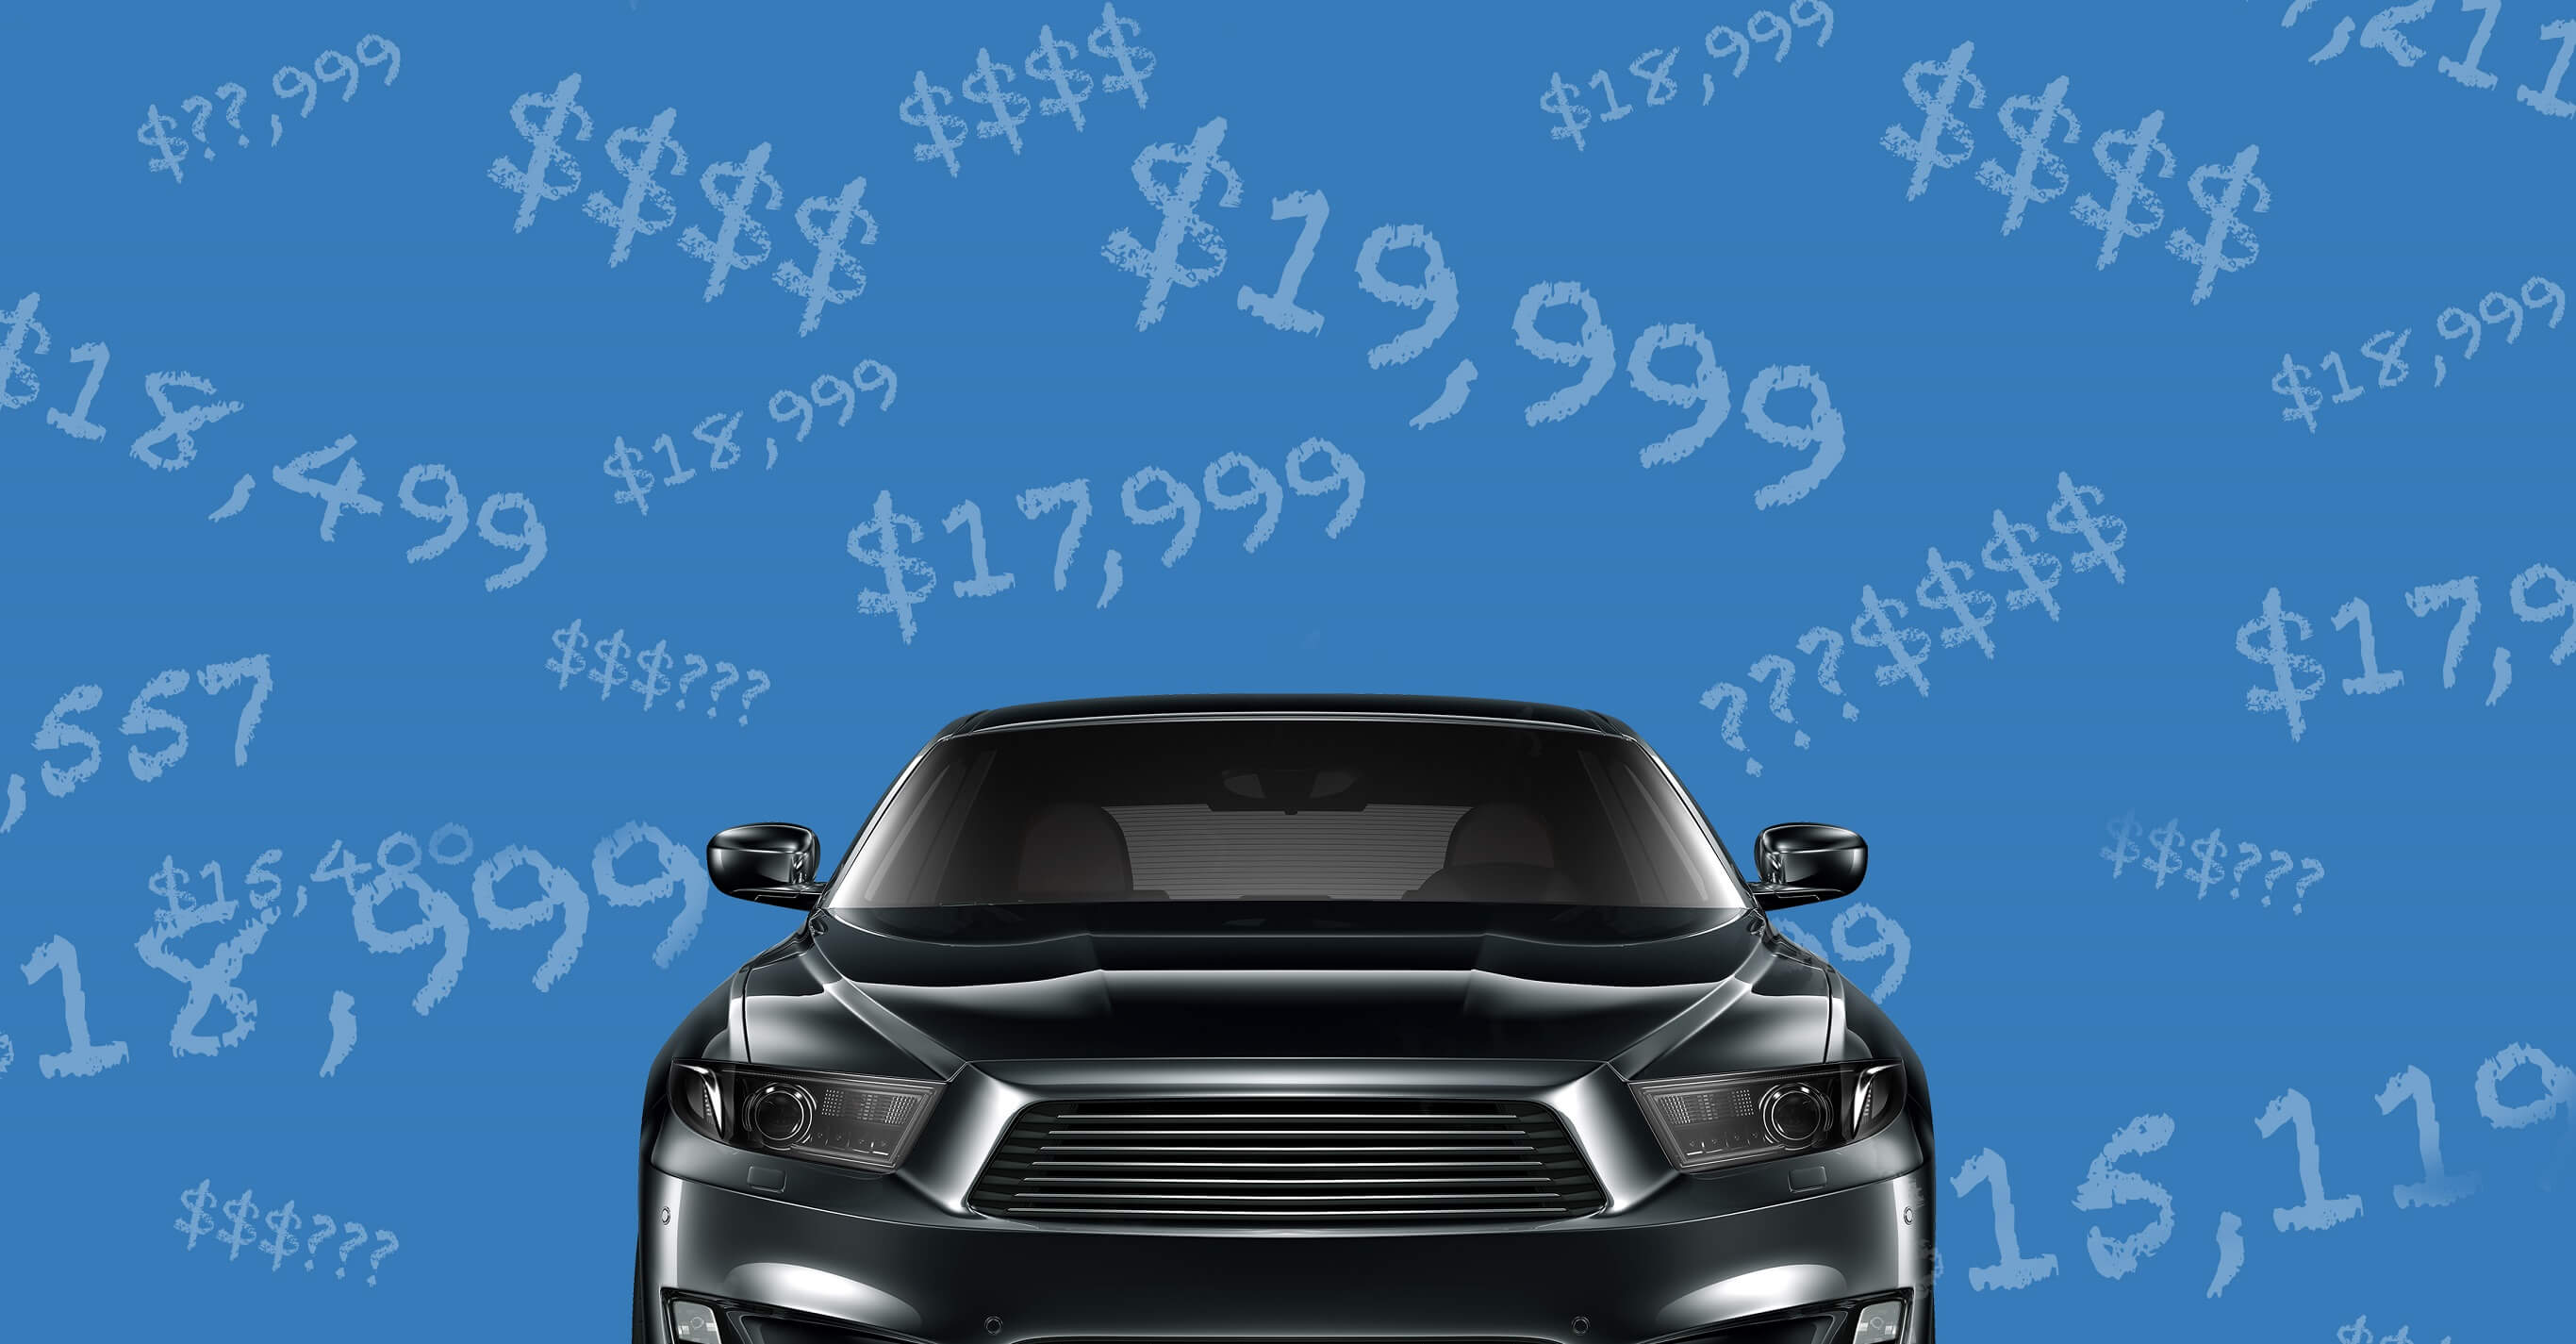 CARFAX Canada Used Car Value Guide article header